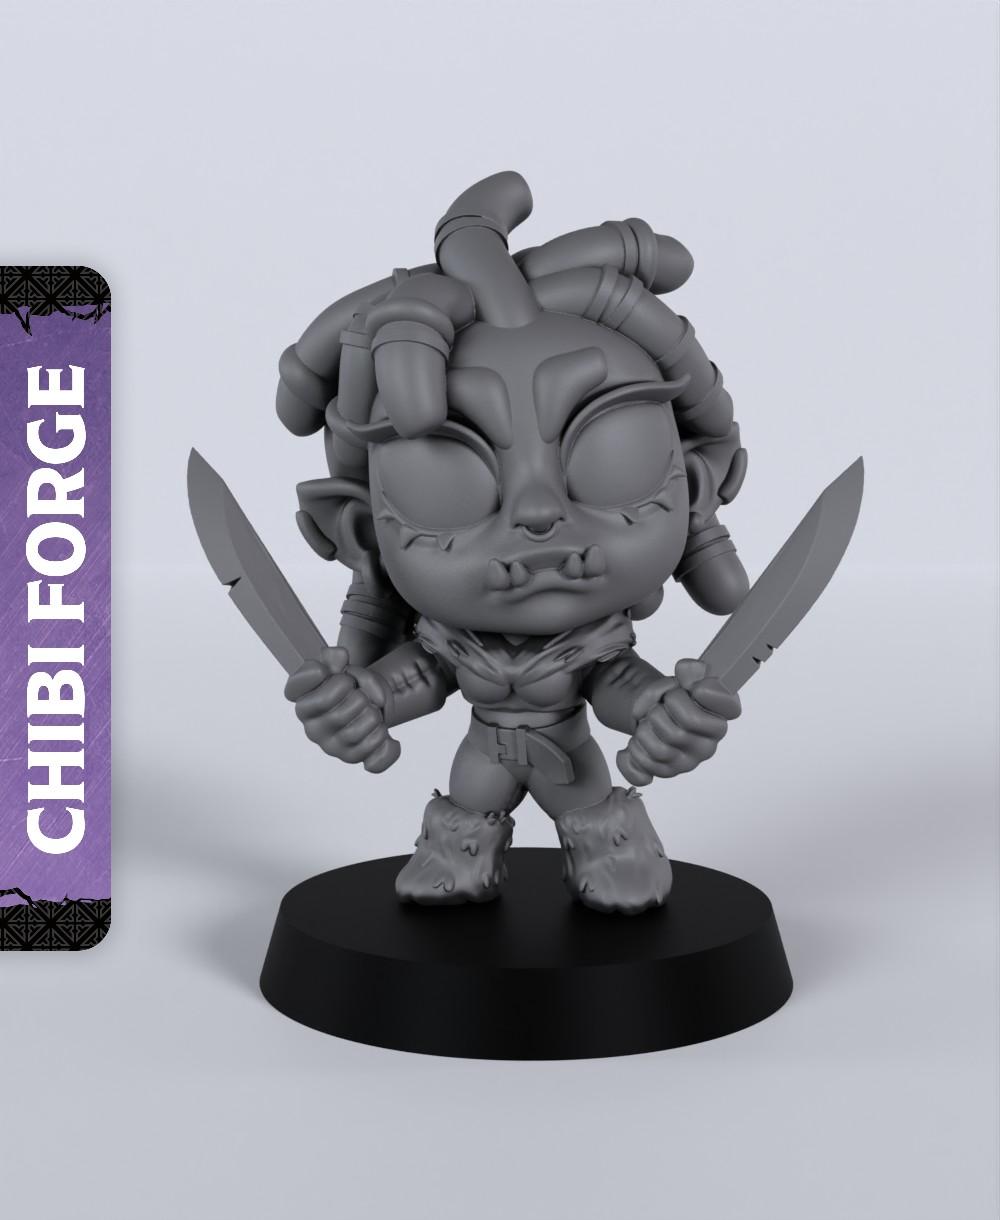 Female Half-Orc Fighter - With Free Dragon Warhammer - 5e DnD Inspired for RPG and Wargamers 3d model